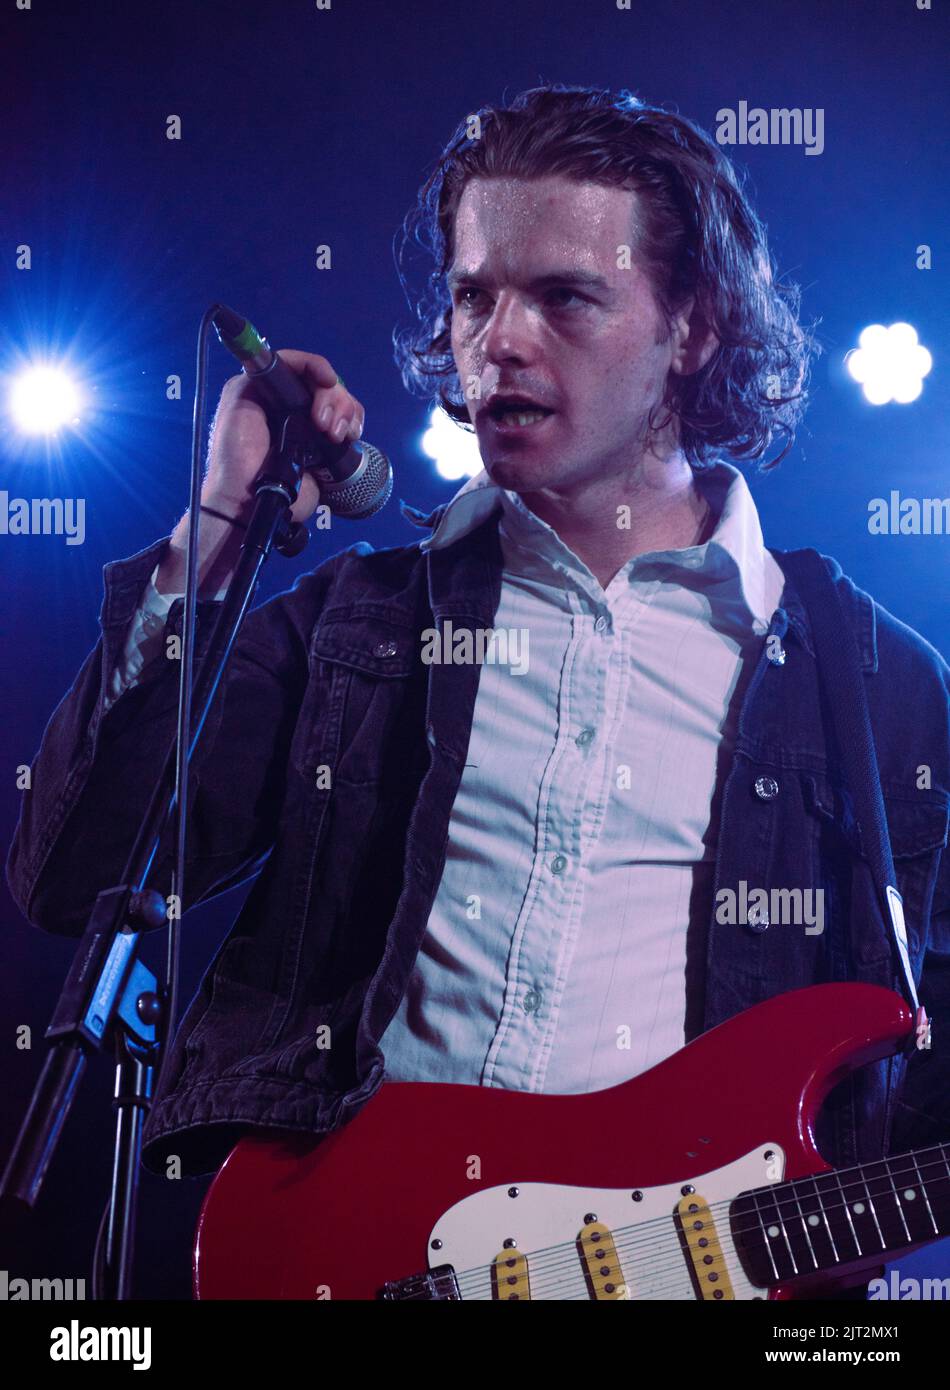 The Blinders plays at Leeds Festival on Friday 26th August 2022, playing the Festival Republic Stage which is presented by IHG hotels and resorts Credit: Tracy Daniel/Alamy Live News Stock Photo